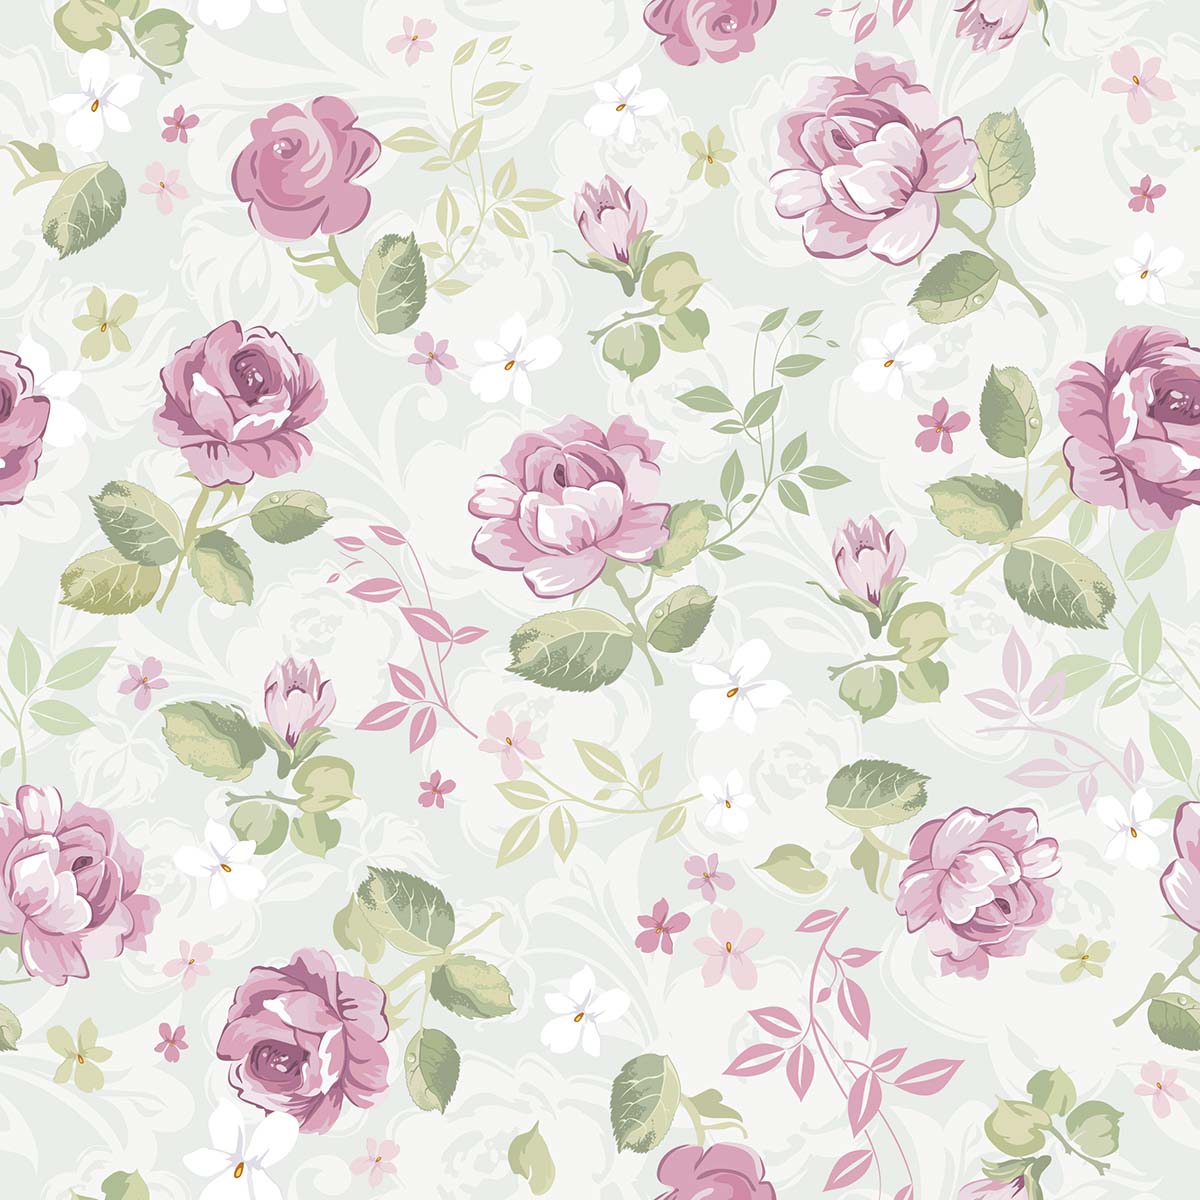 A pattern of pink flowers and leaves